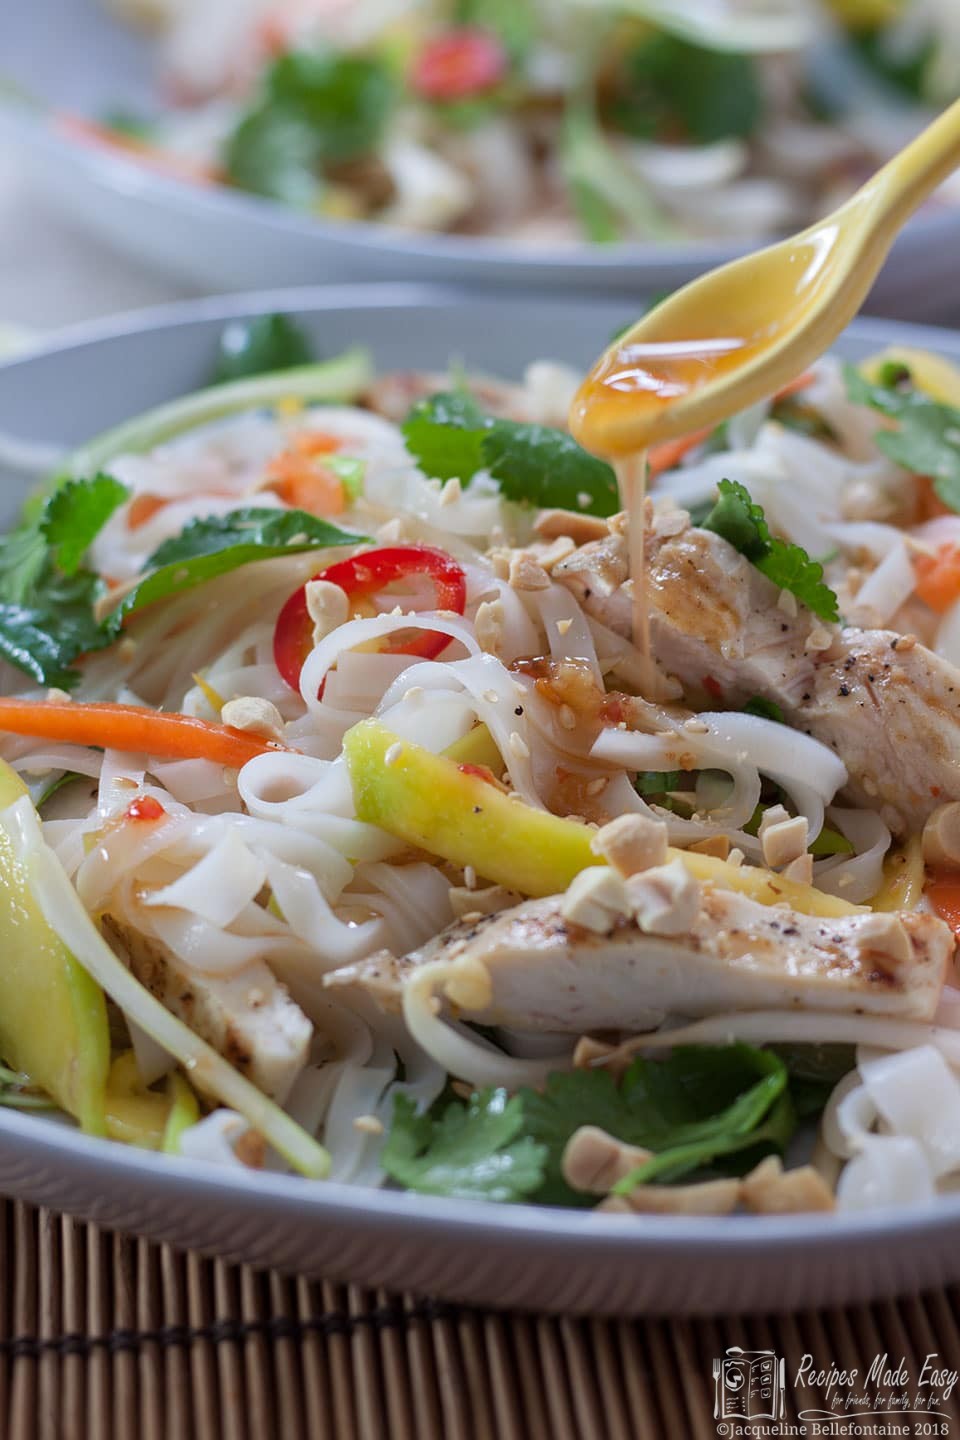 A fresh tasting noodle salad with strips of chargrilled chicken and a sweet chilli dressing.